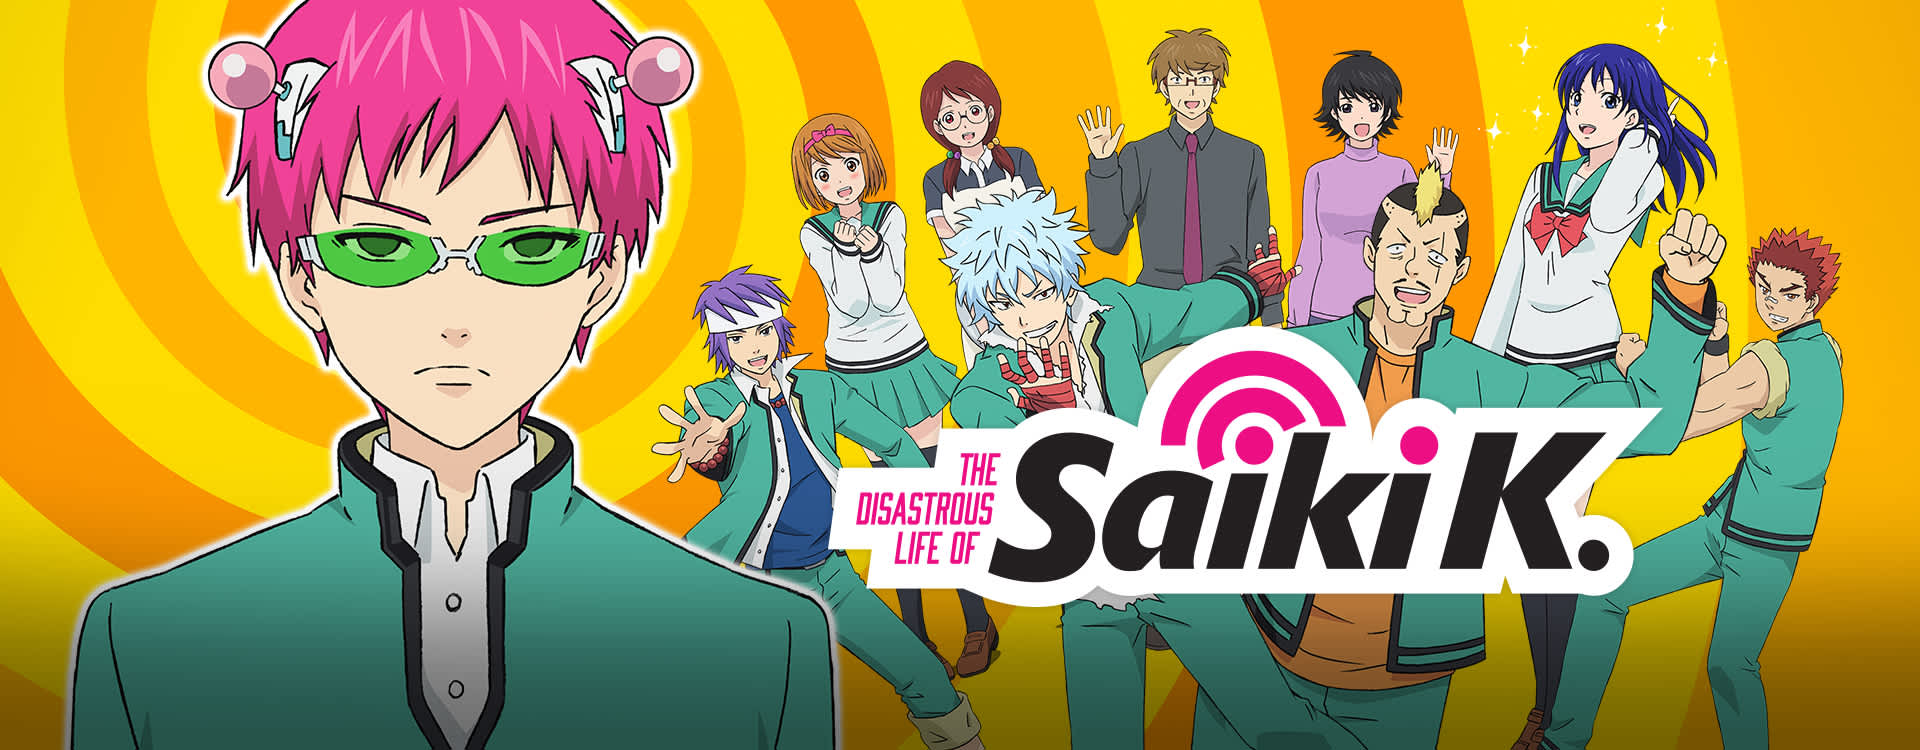 Source: Funimation Title: The Disastrous Life of Saiki K. Genre: Anime/High...